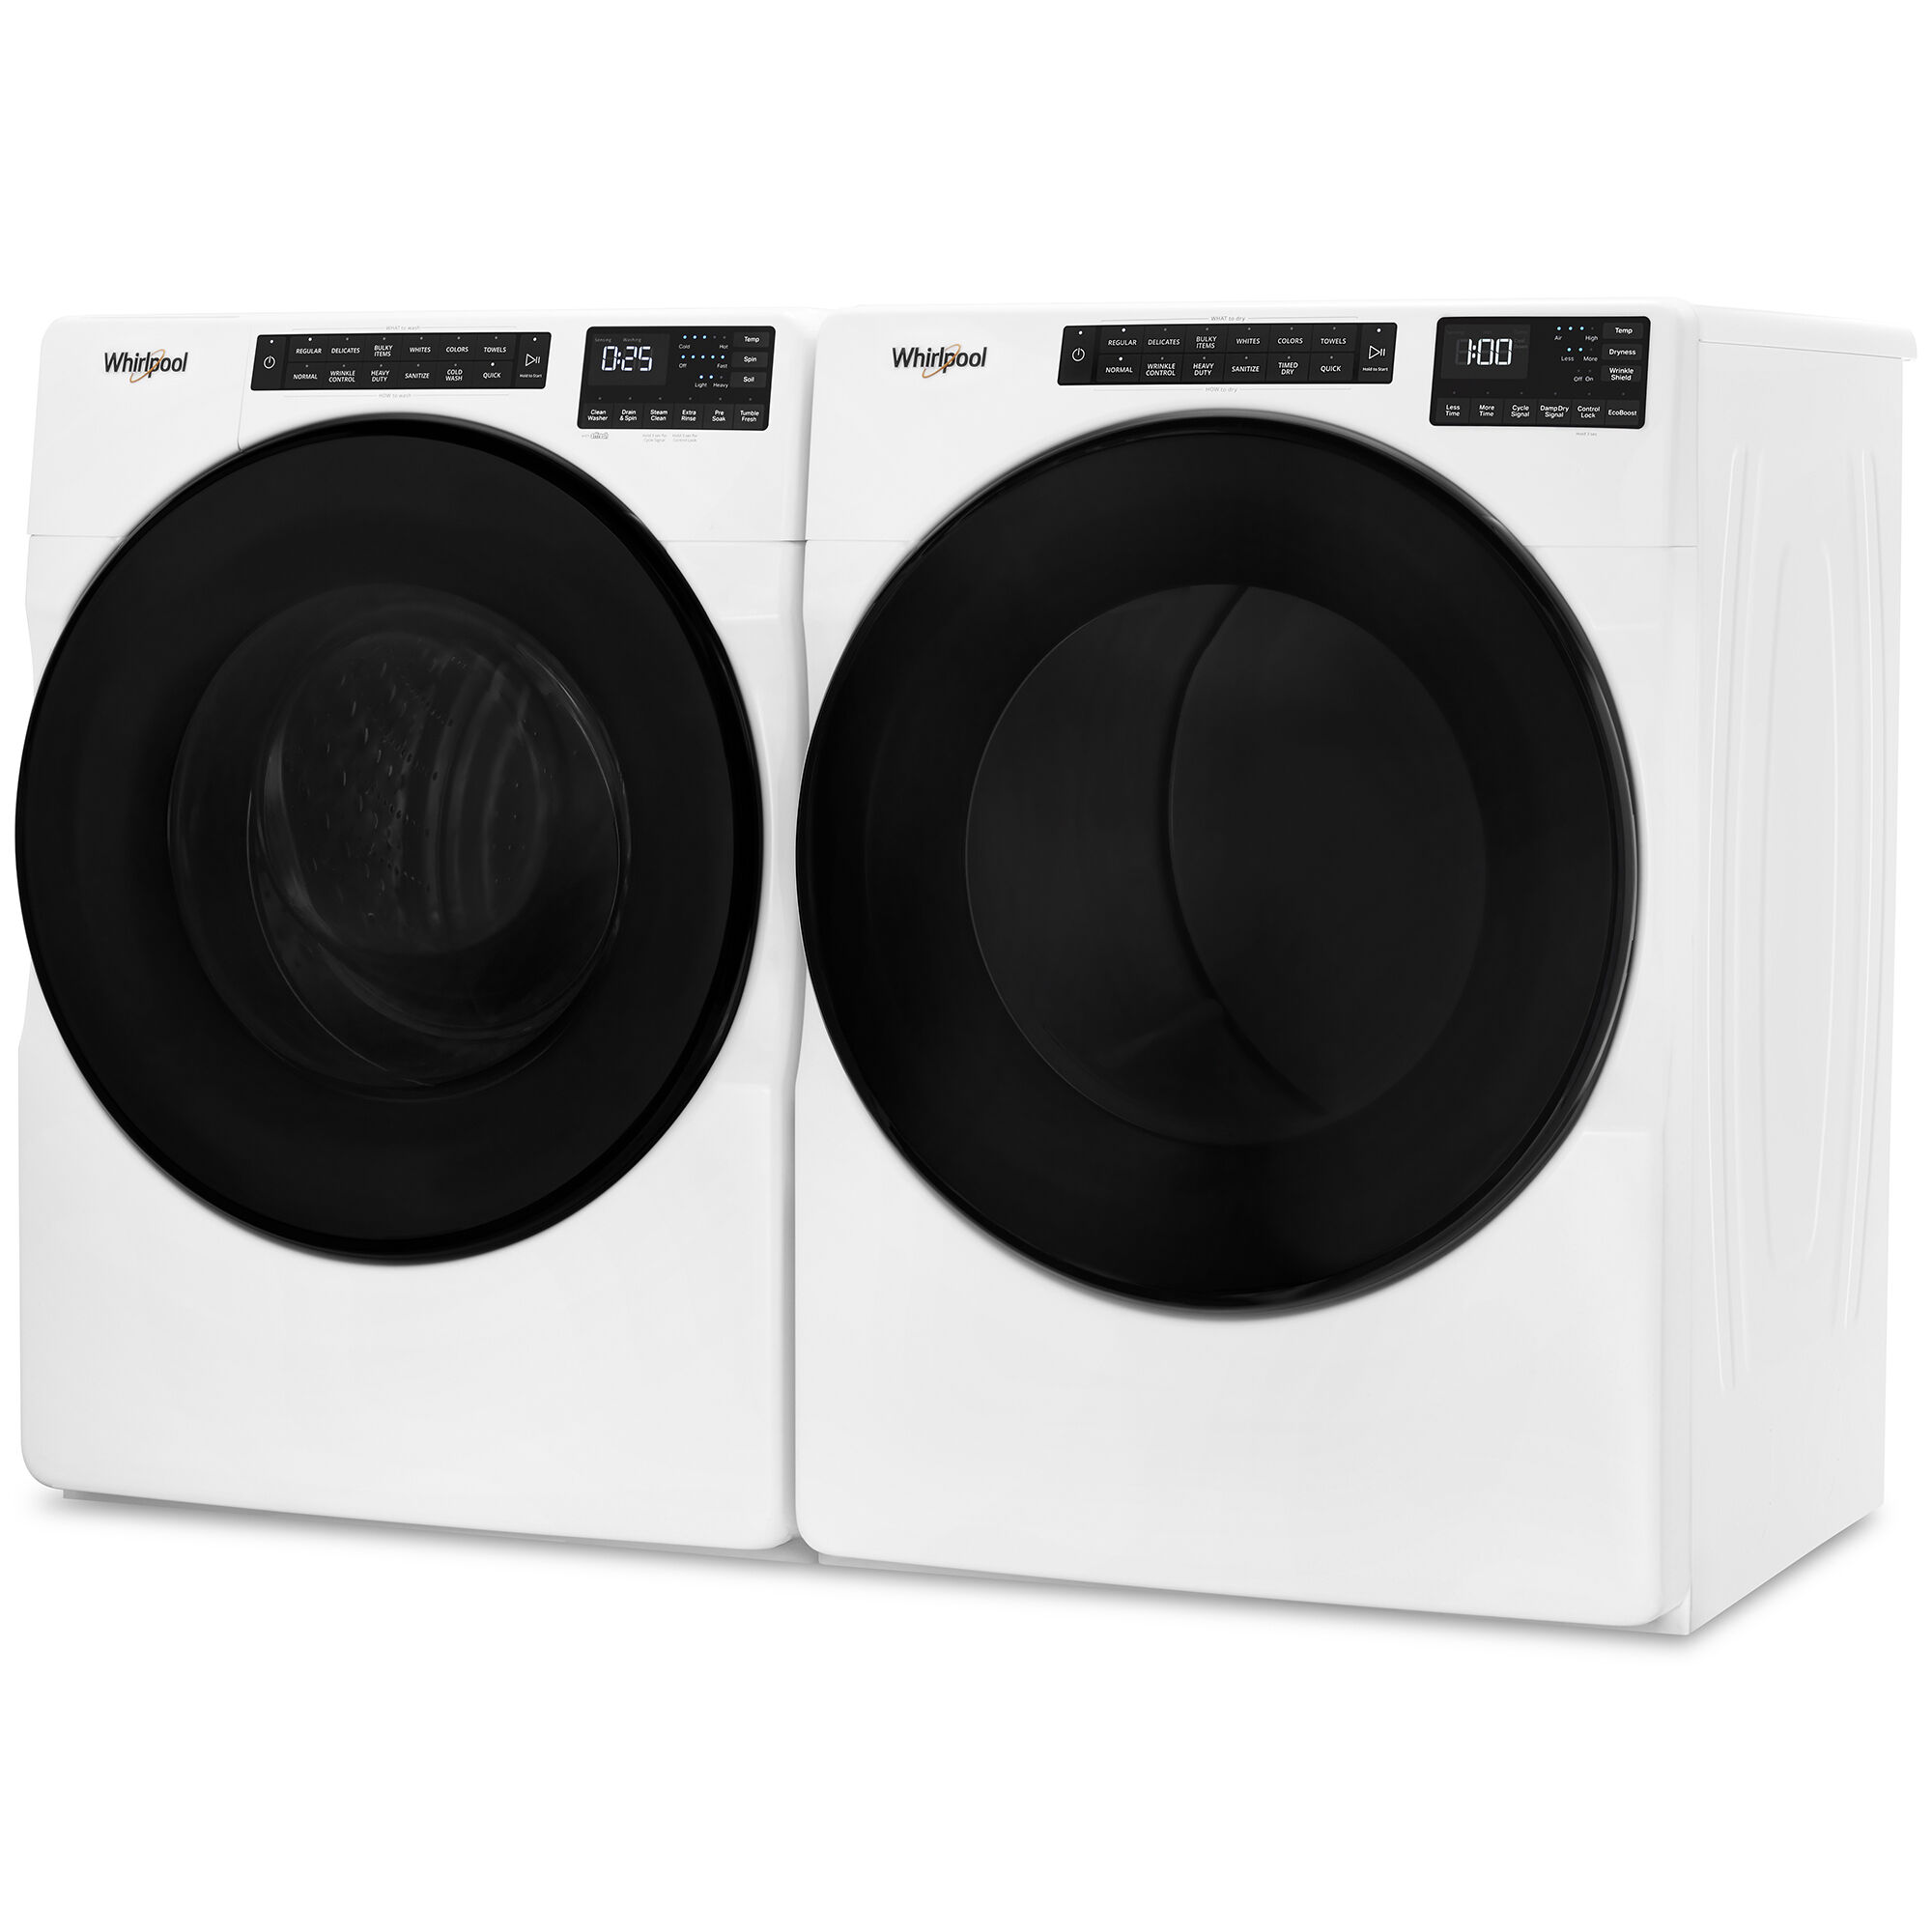 Whirlpool 27 in. 7.4 cu. ft. Stackable Gas Dryer with 36 Dryer 